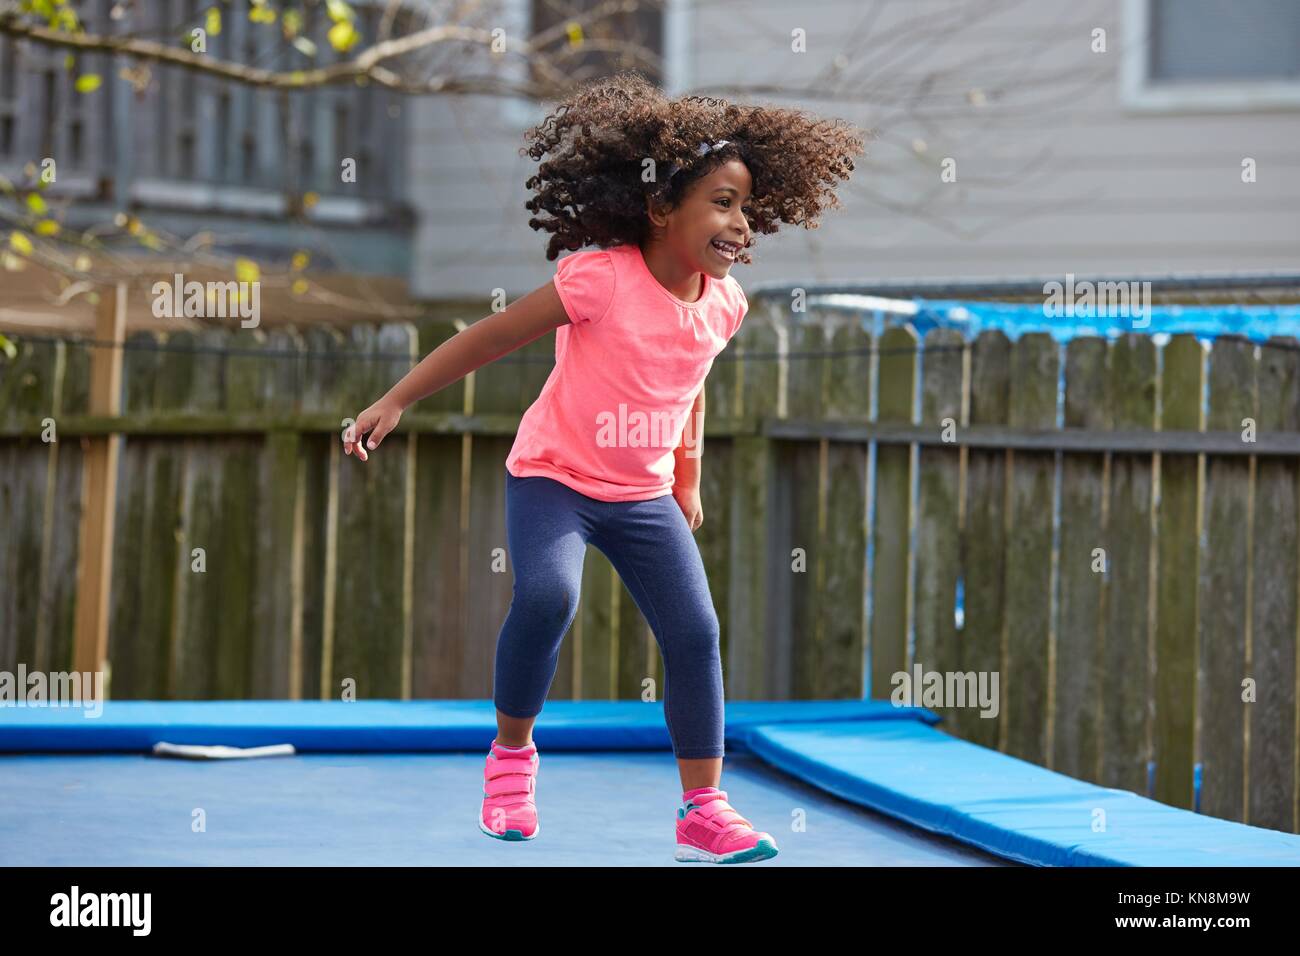 Kid toddler girl jumping on a trampoline playground in the backyard latin ethnicity. Stock Photo